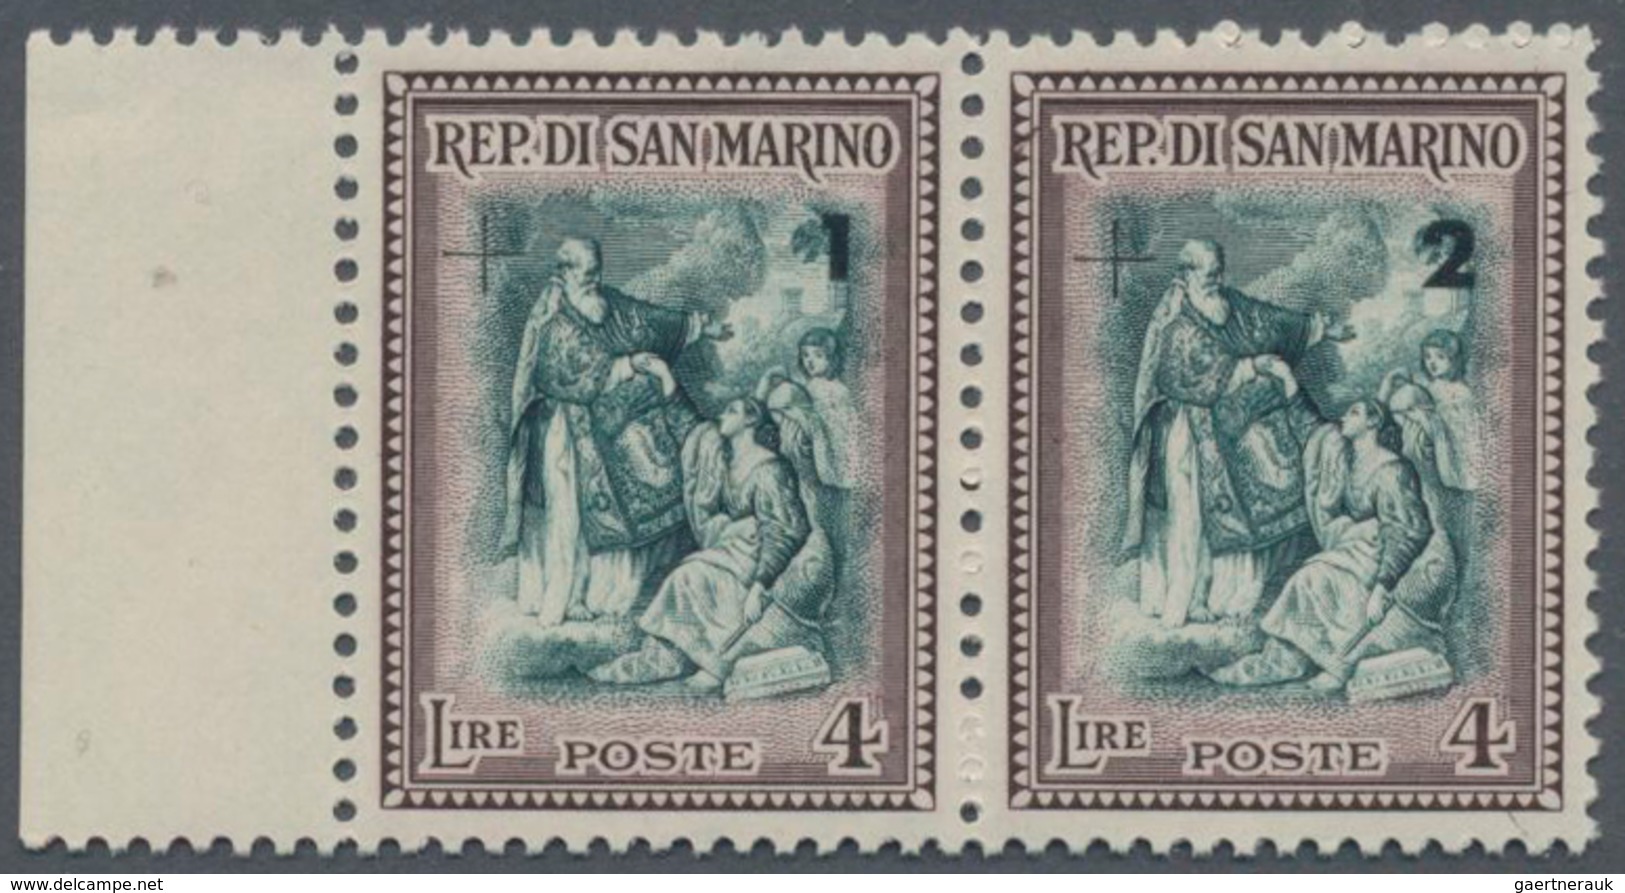 San Marino: 1947, Reconstruction (Batoni Painting) Complete Set Of Twelve With Different Surcharges - Usados